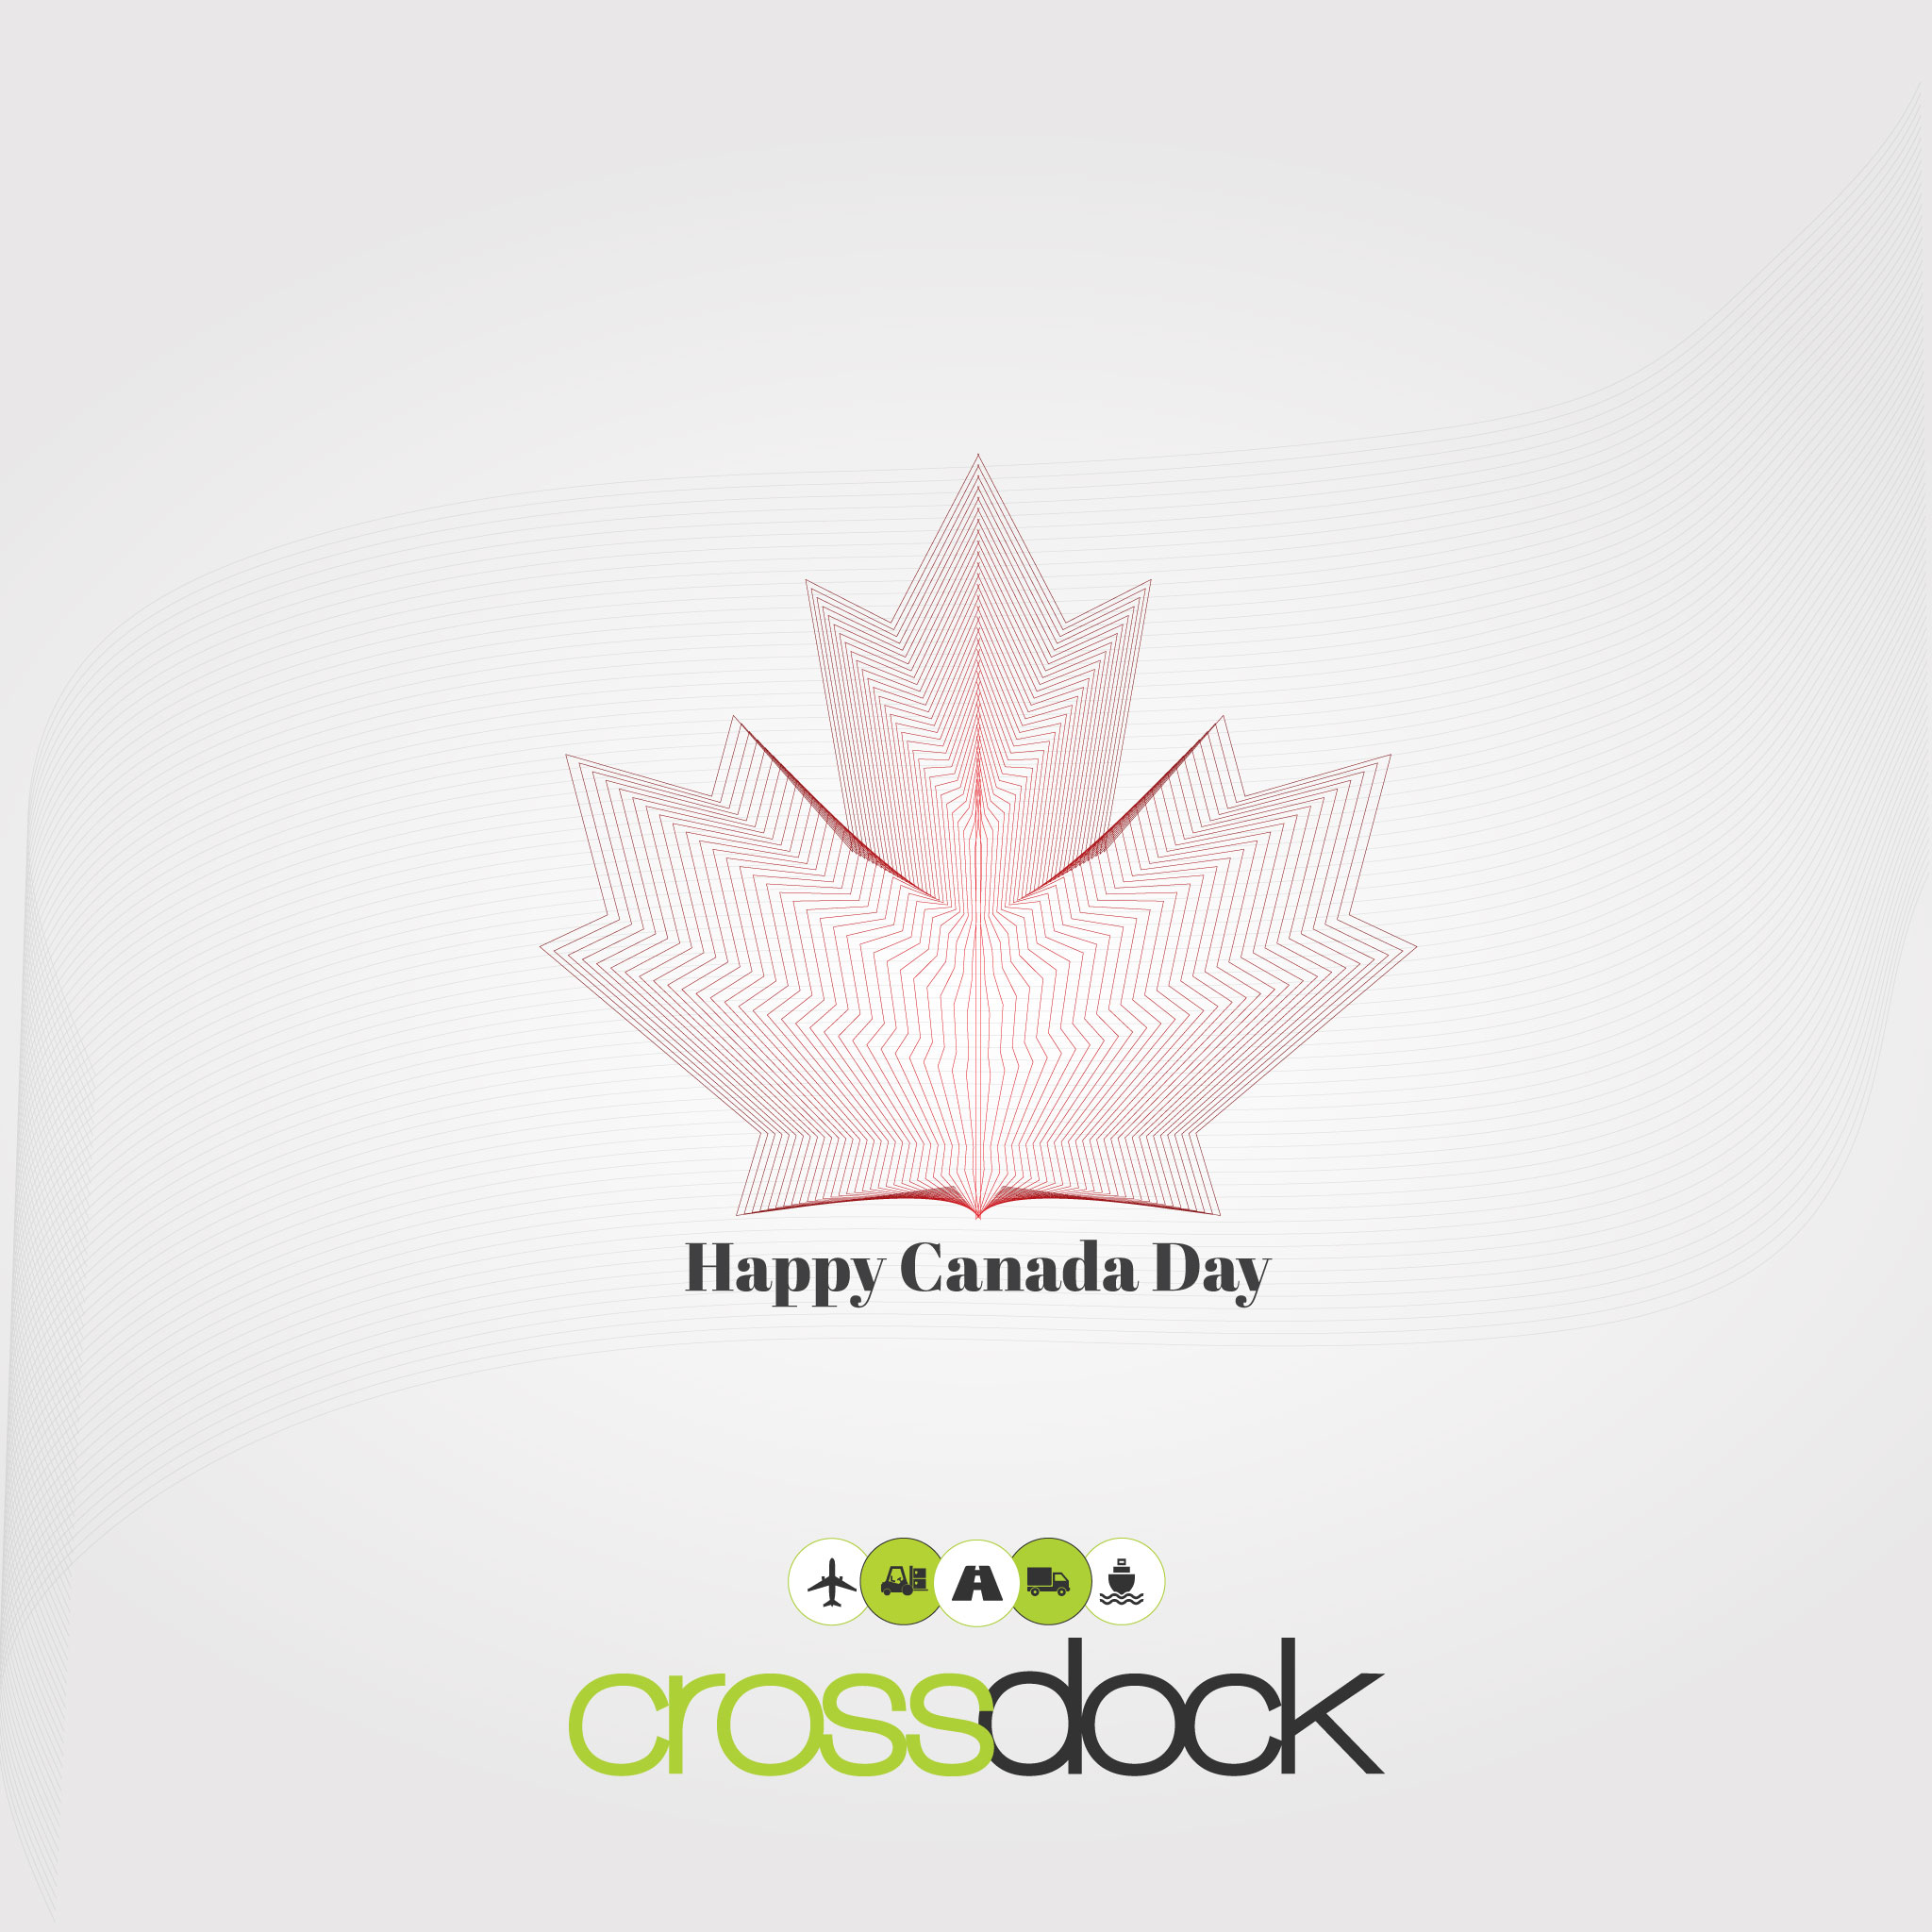 Let's take a moment to appreciate the rich history and cultures that make up this beautiful country. Whether you're enjoying a barbecue, watching fireworks, or simply spending time with loved ones, let's celebrate the values that unite us: peace, kindness, and respect.

Here's to the True North strong and free! 🍁

#CanadaDay #ProudlyCanadian #TrueNorthStrongAndFree